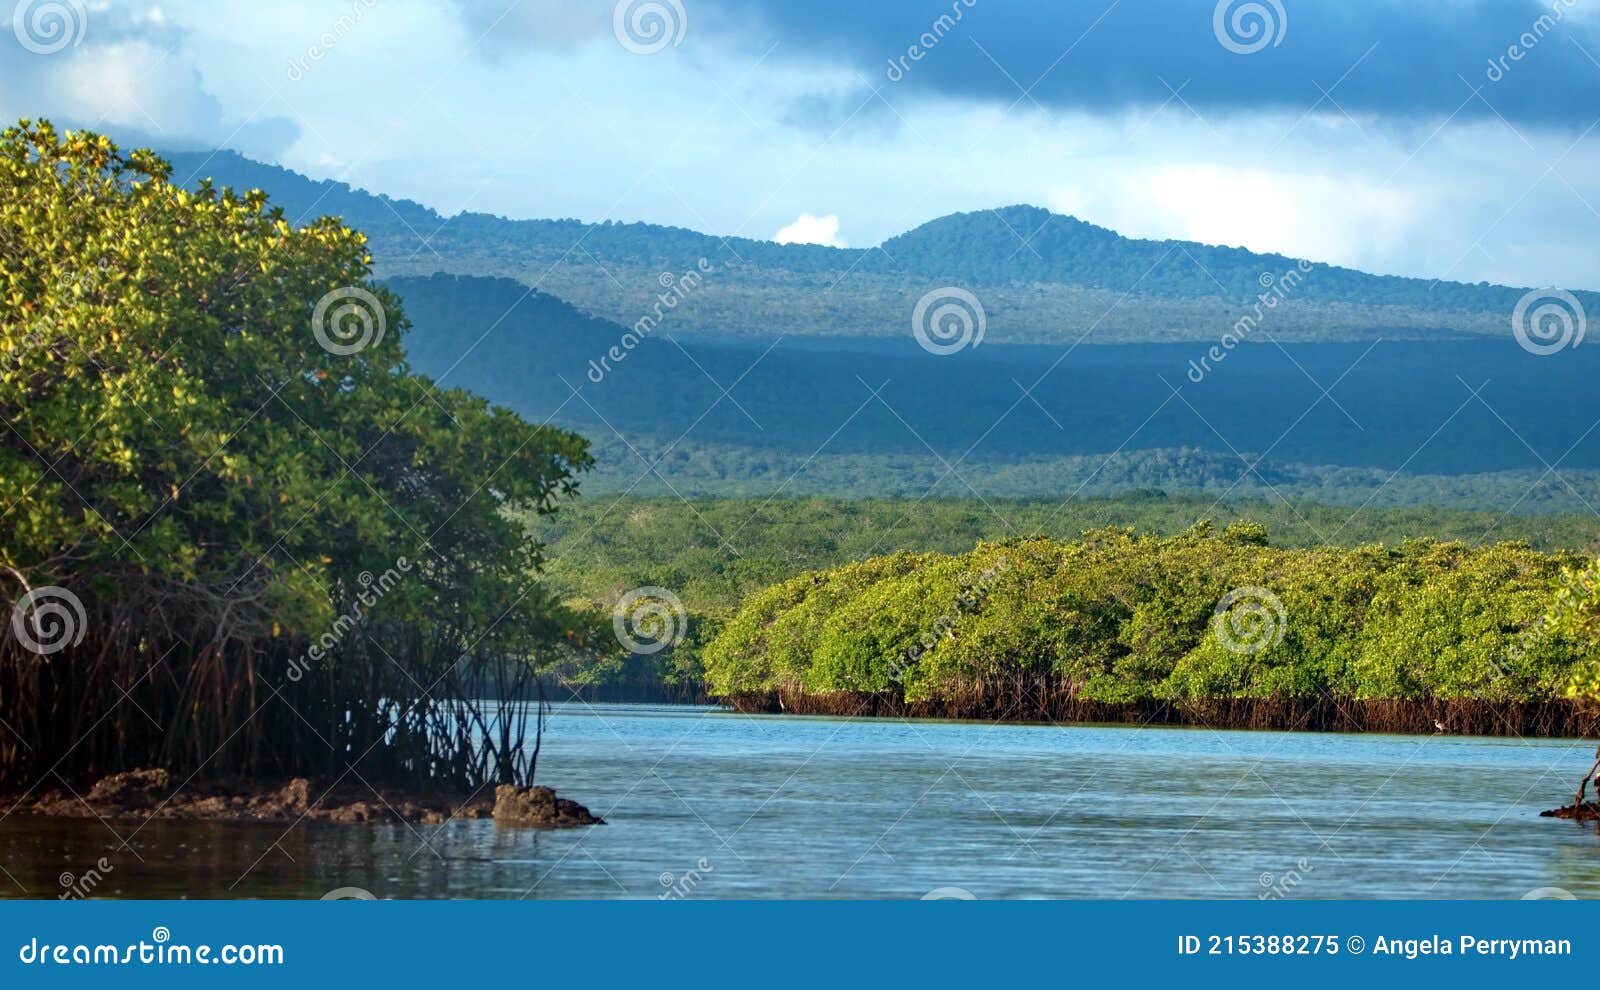 mangrove forest in the galapagos islands